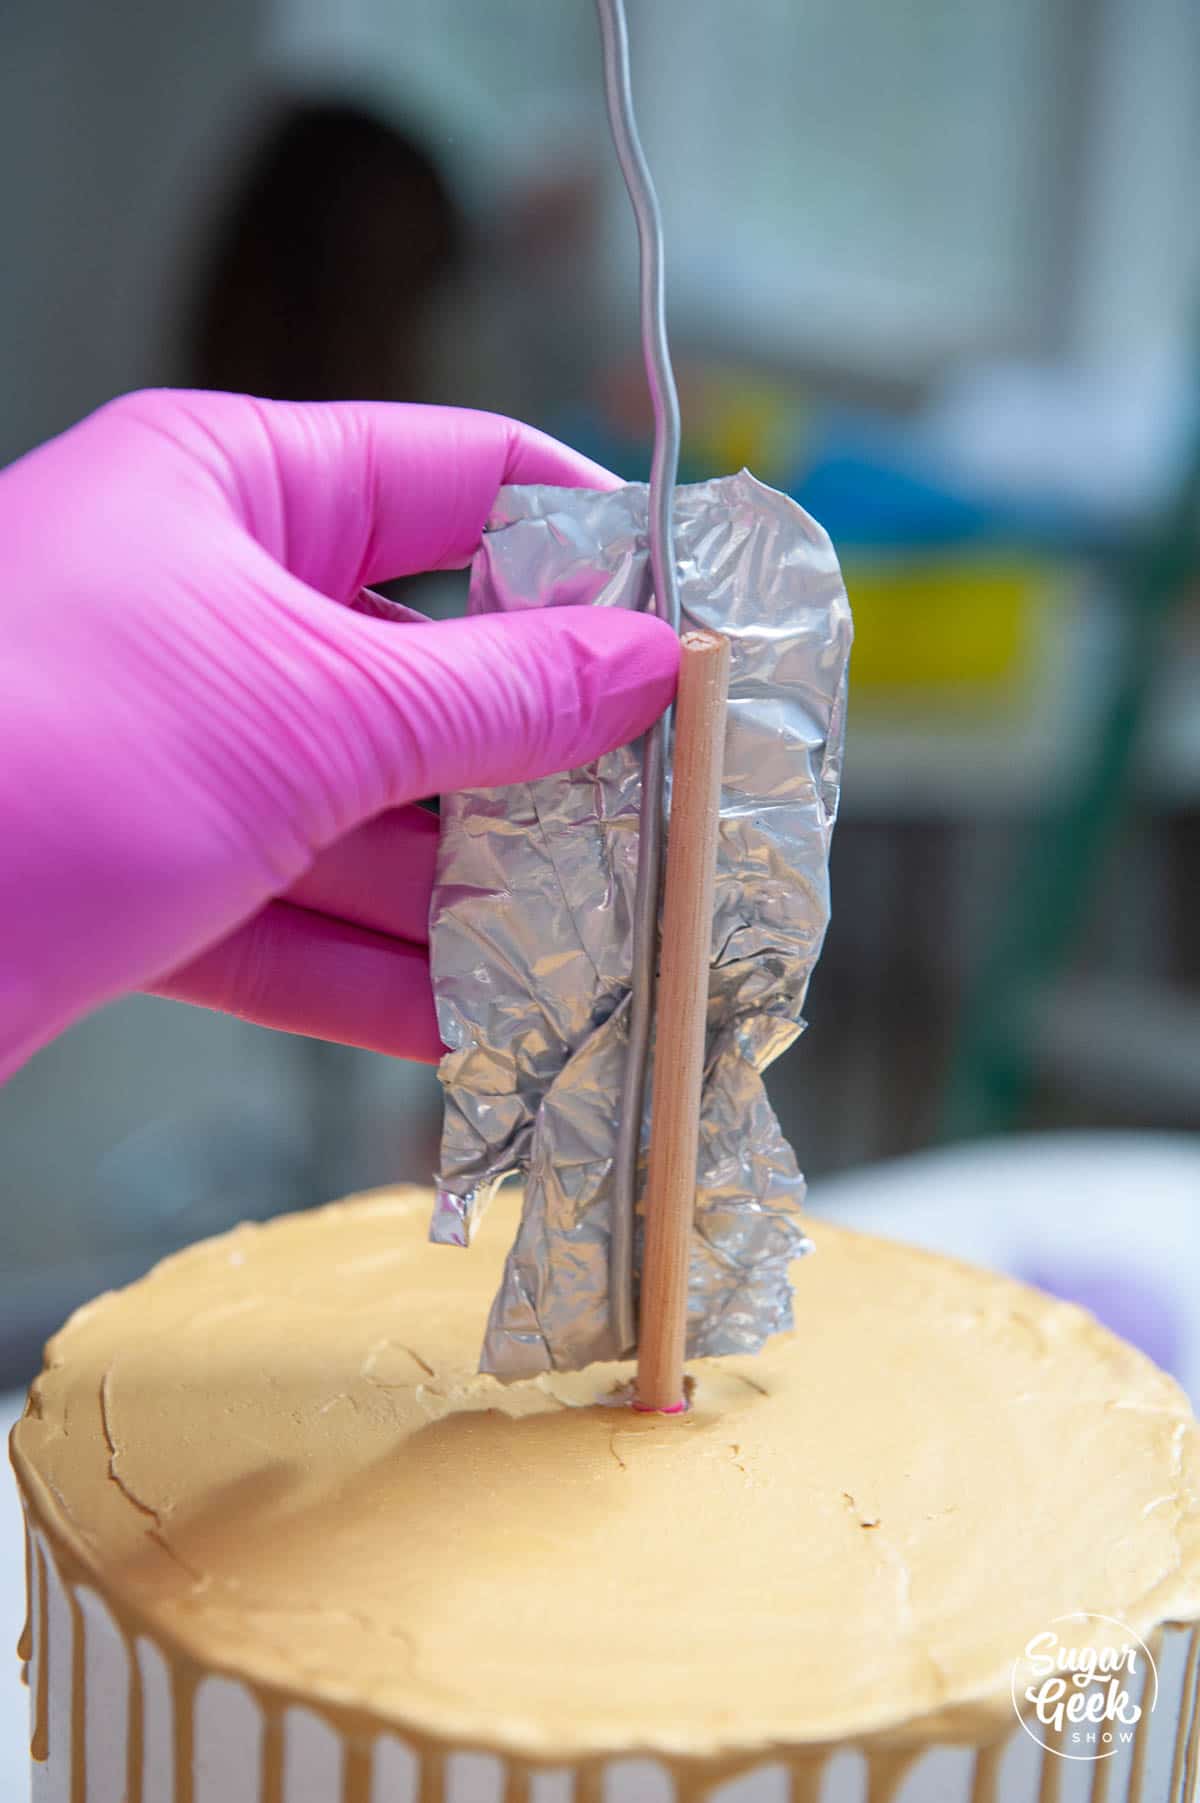 dowel inserted into the cake with aluminum foil tape